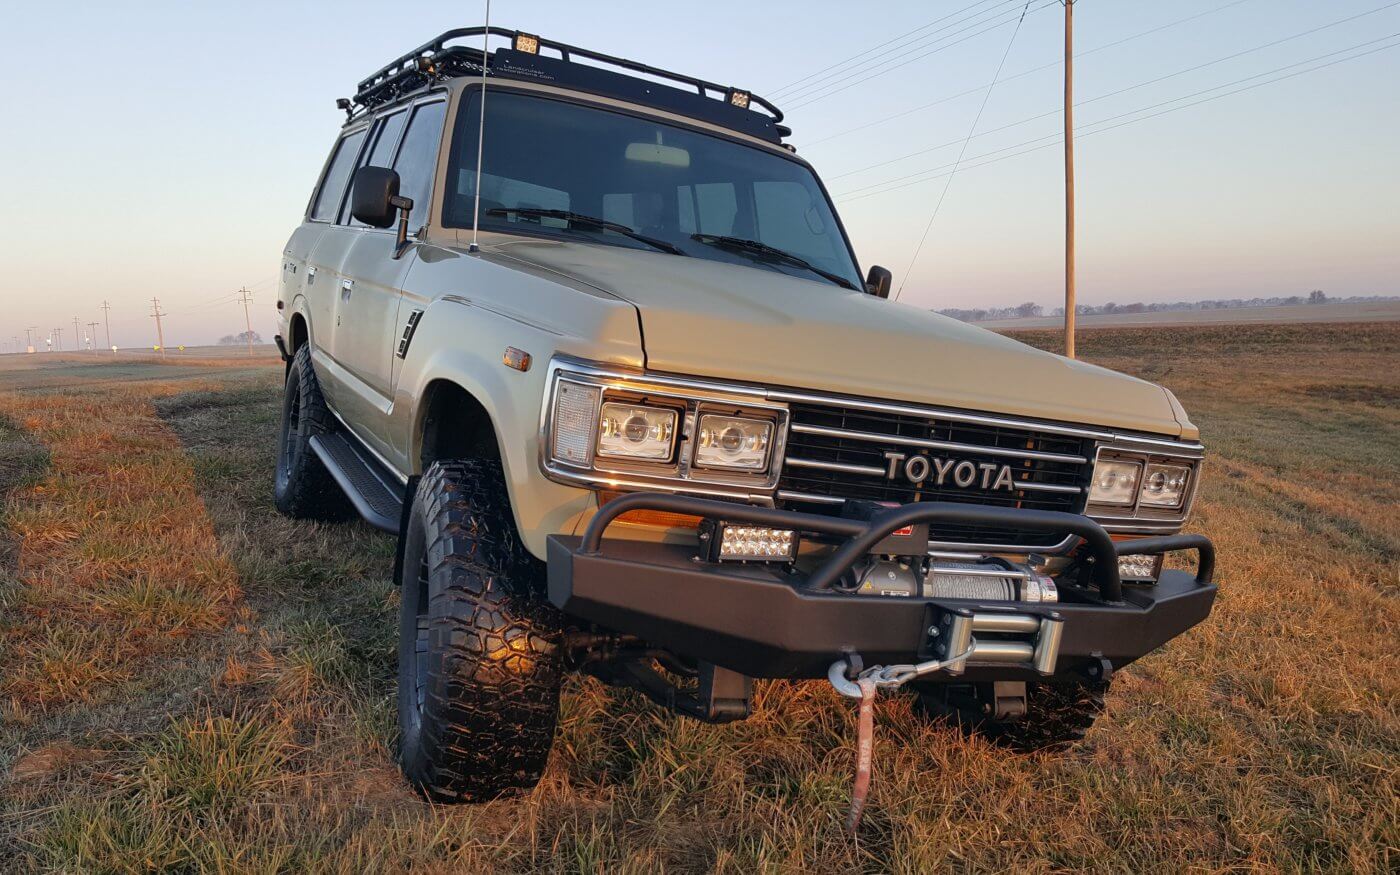 1989 Toyota FJ62 Land Cruiser Fully Restored with 5.3 V8 Front View